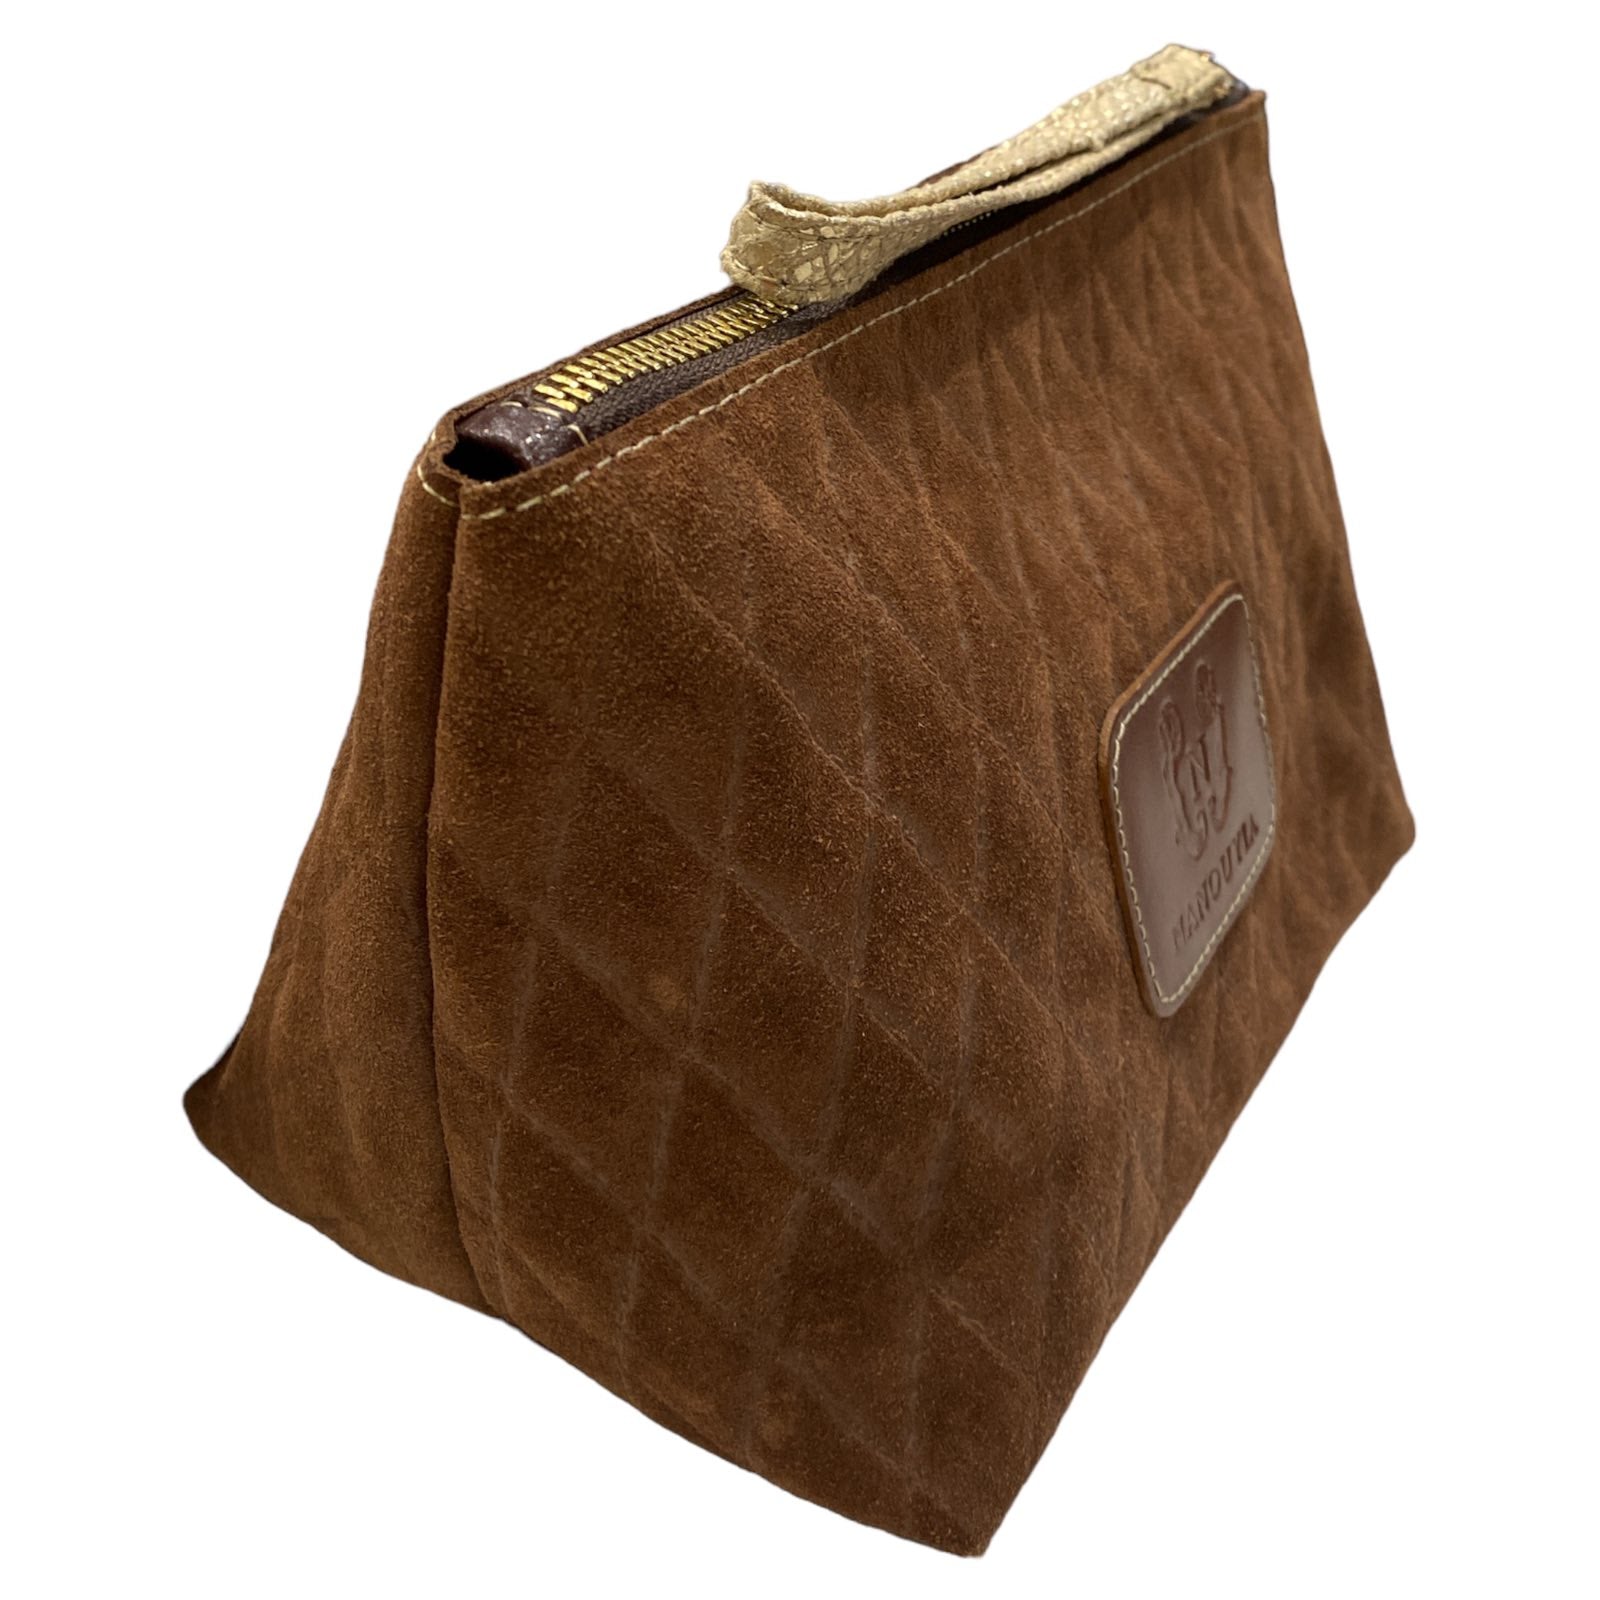 Brown quilted suede leather beauty case